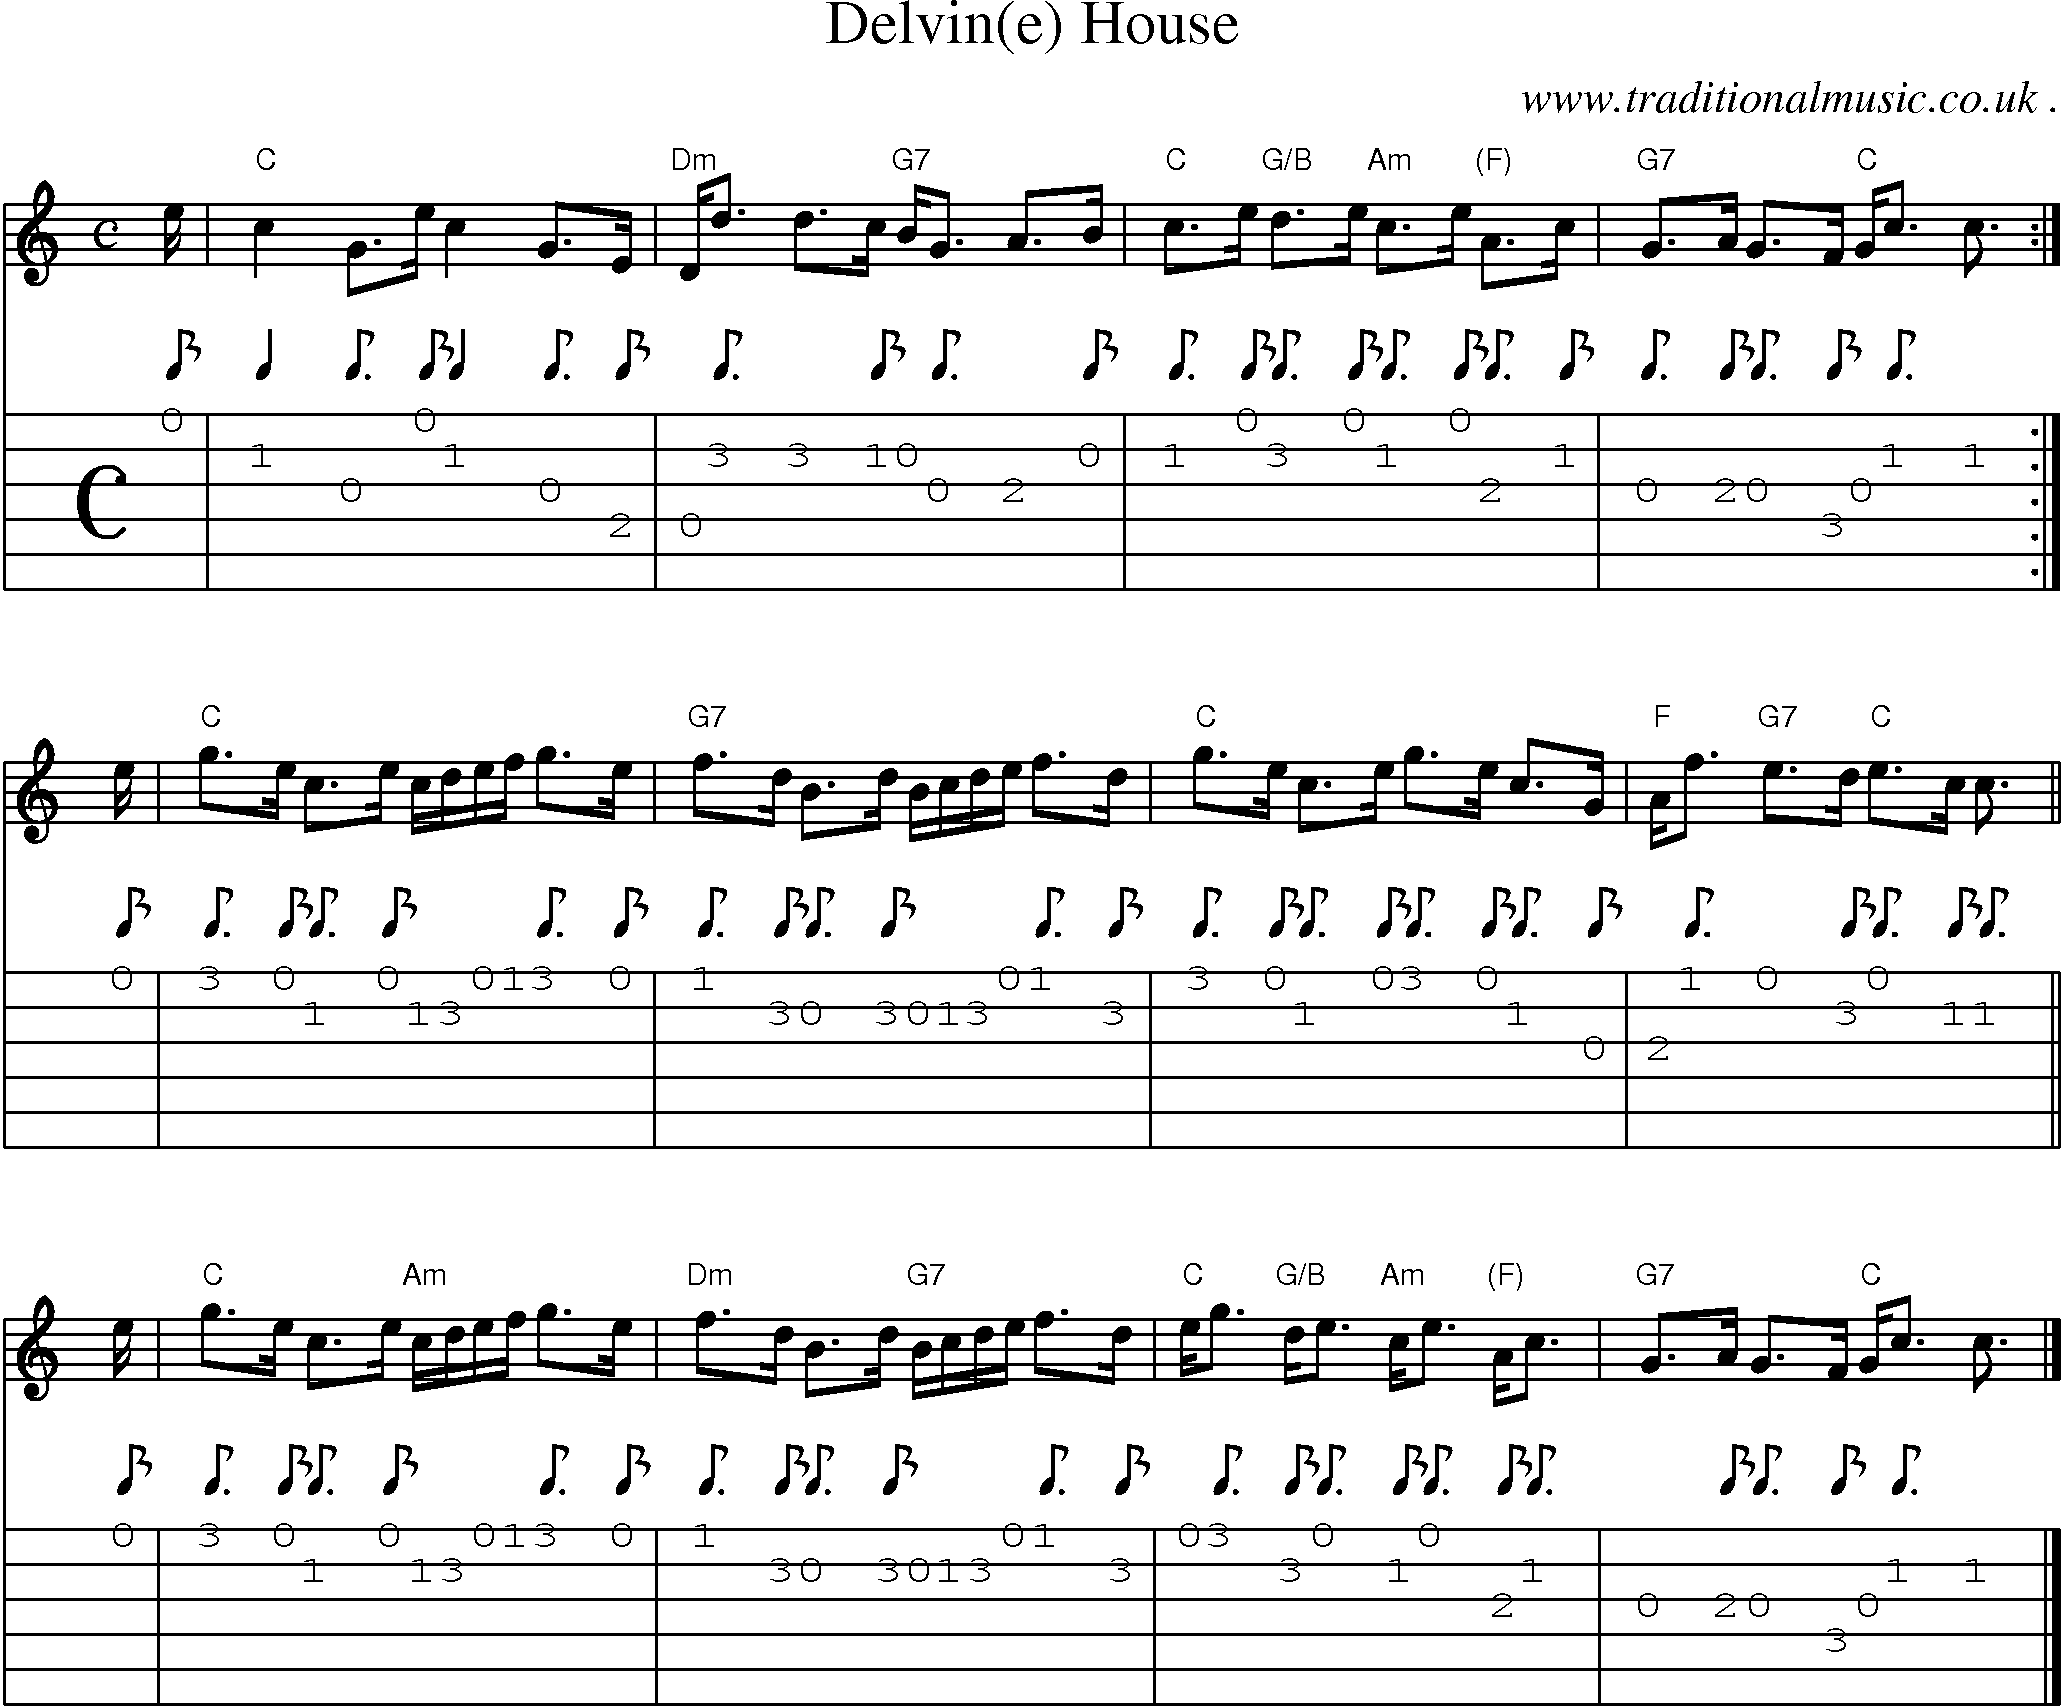 Sheet-music  score, Chords and Guitar Tabs for Delvine House